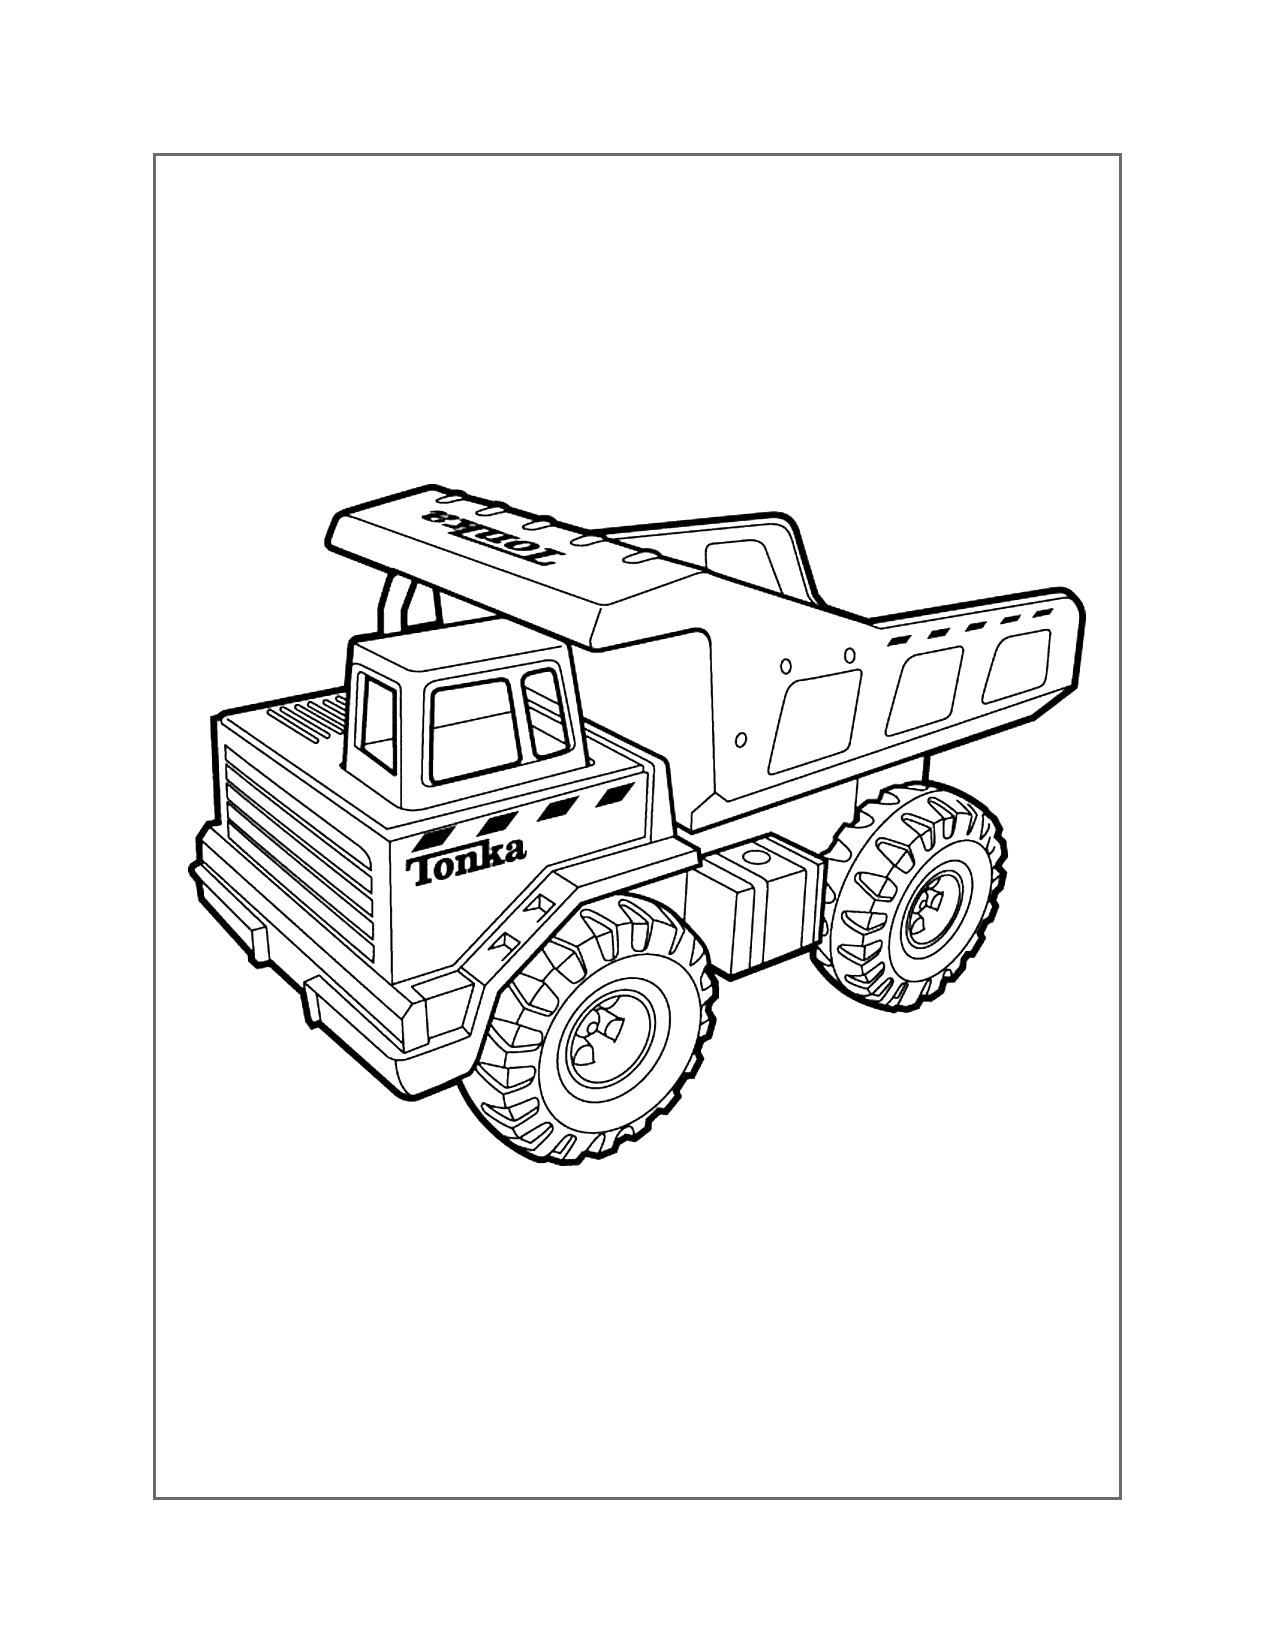 Tonka Dump Truck Coloring Page